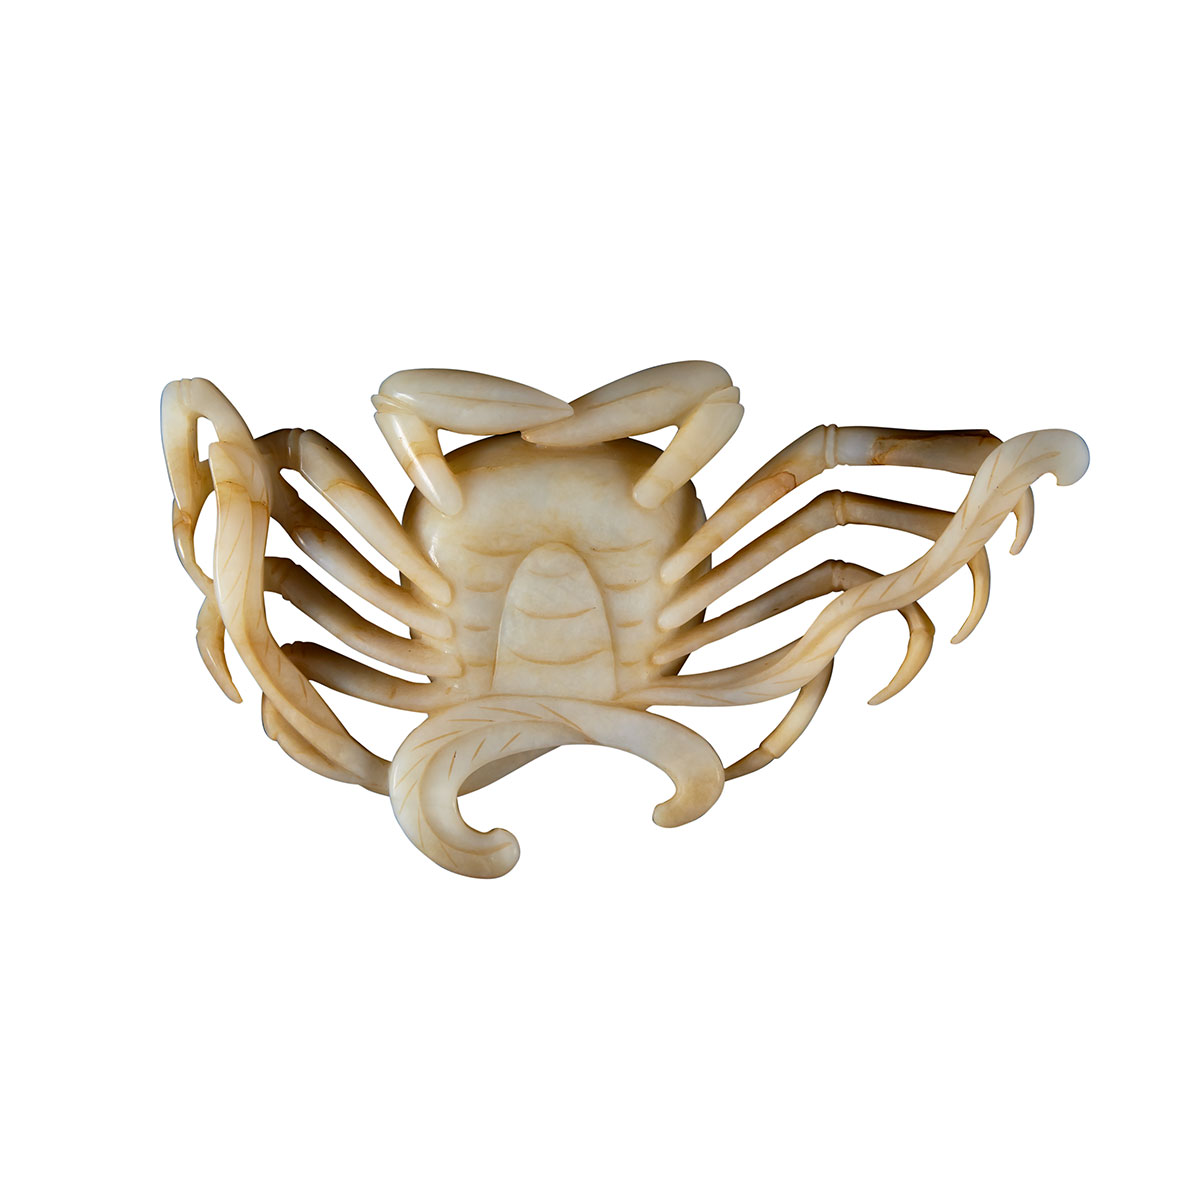 Mottled White Jade Carving of a Crab